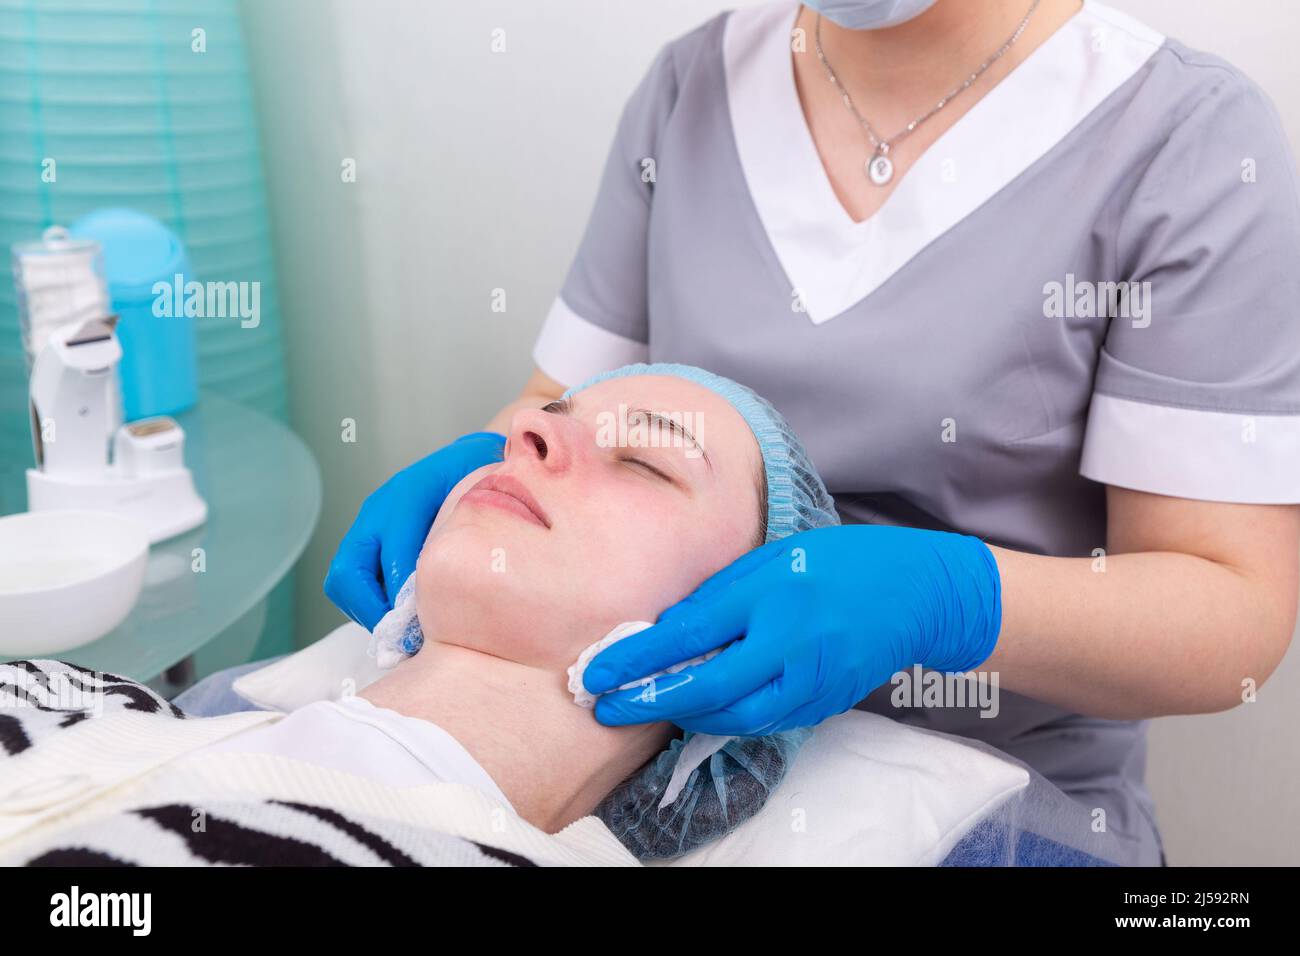 The cosmetologist treats the skin of the face with a tonic in order to moisturize and cleanse the skin before cosmetic procedures Stock Photo